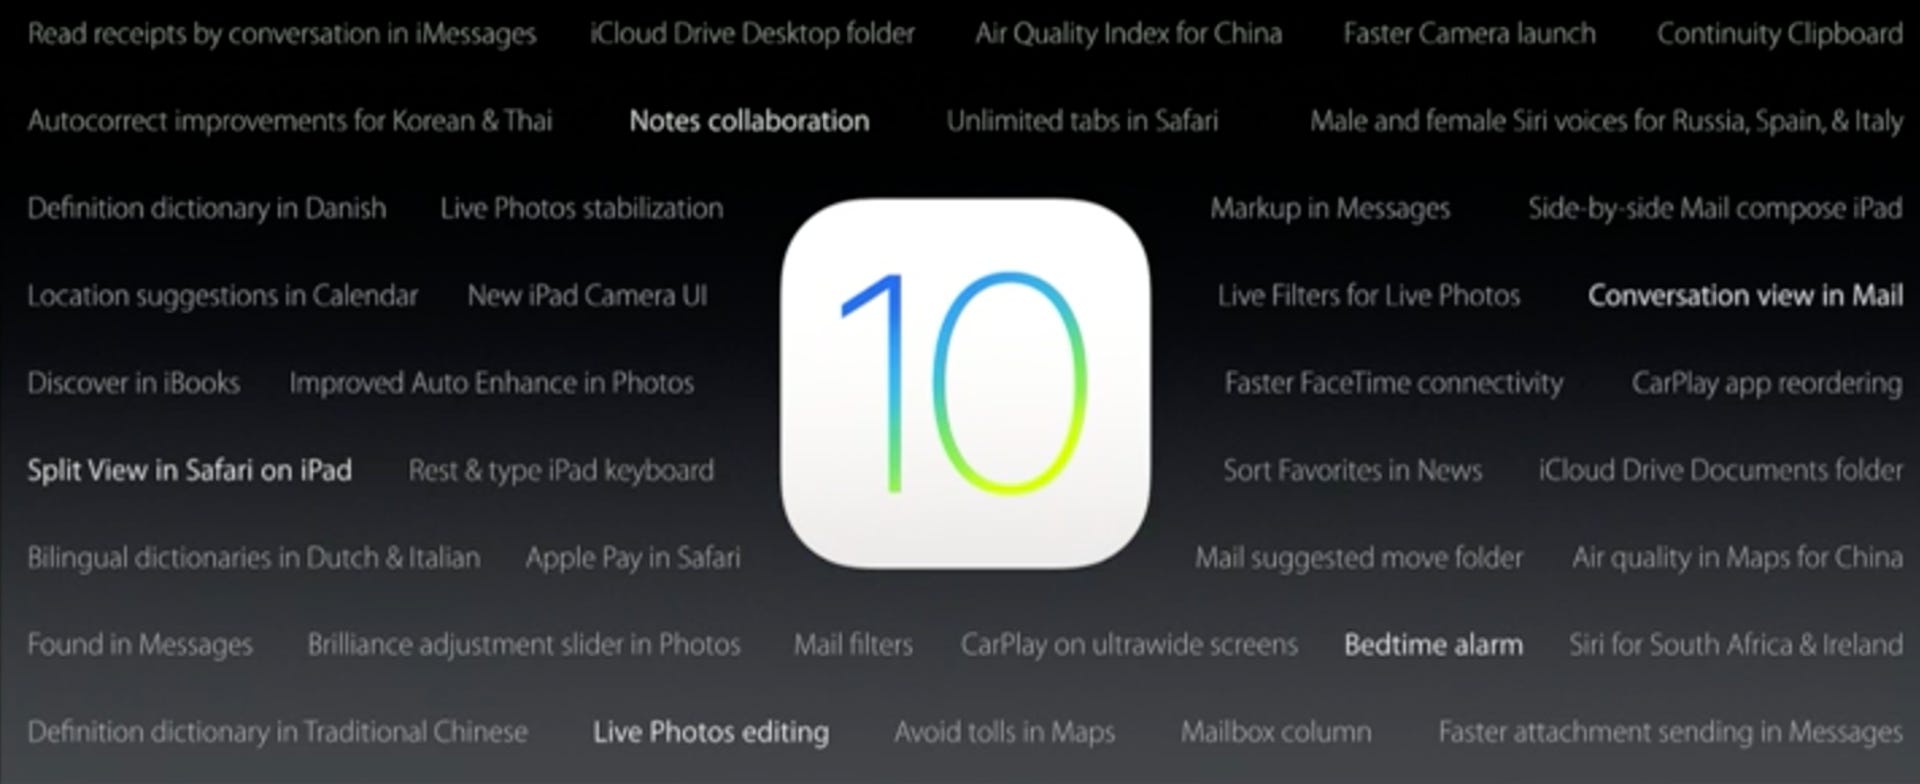 Apple's iOS 10 brings many new features.